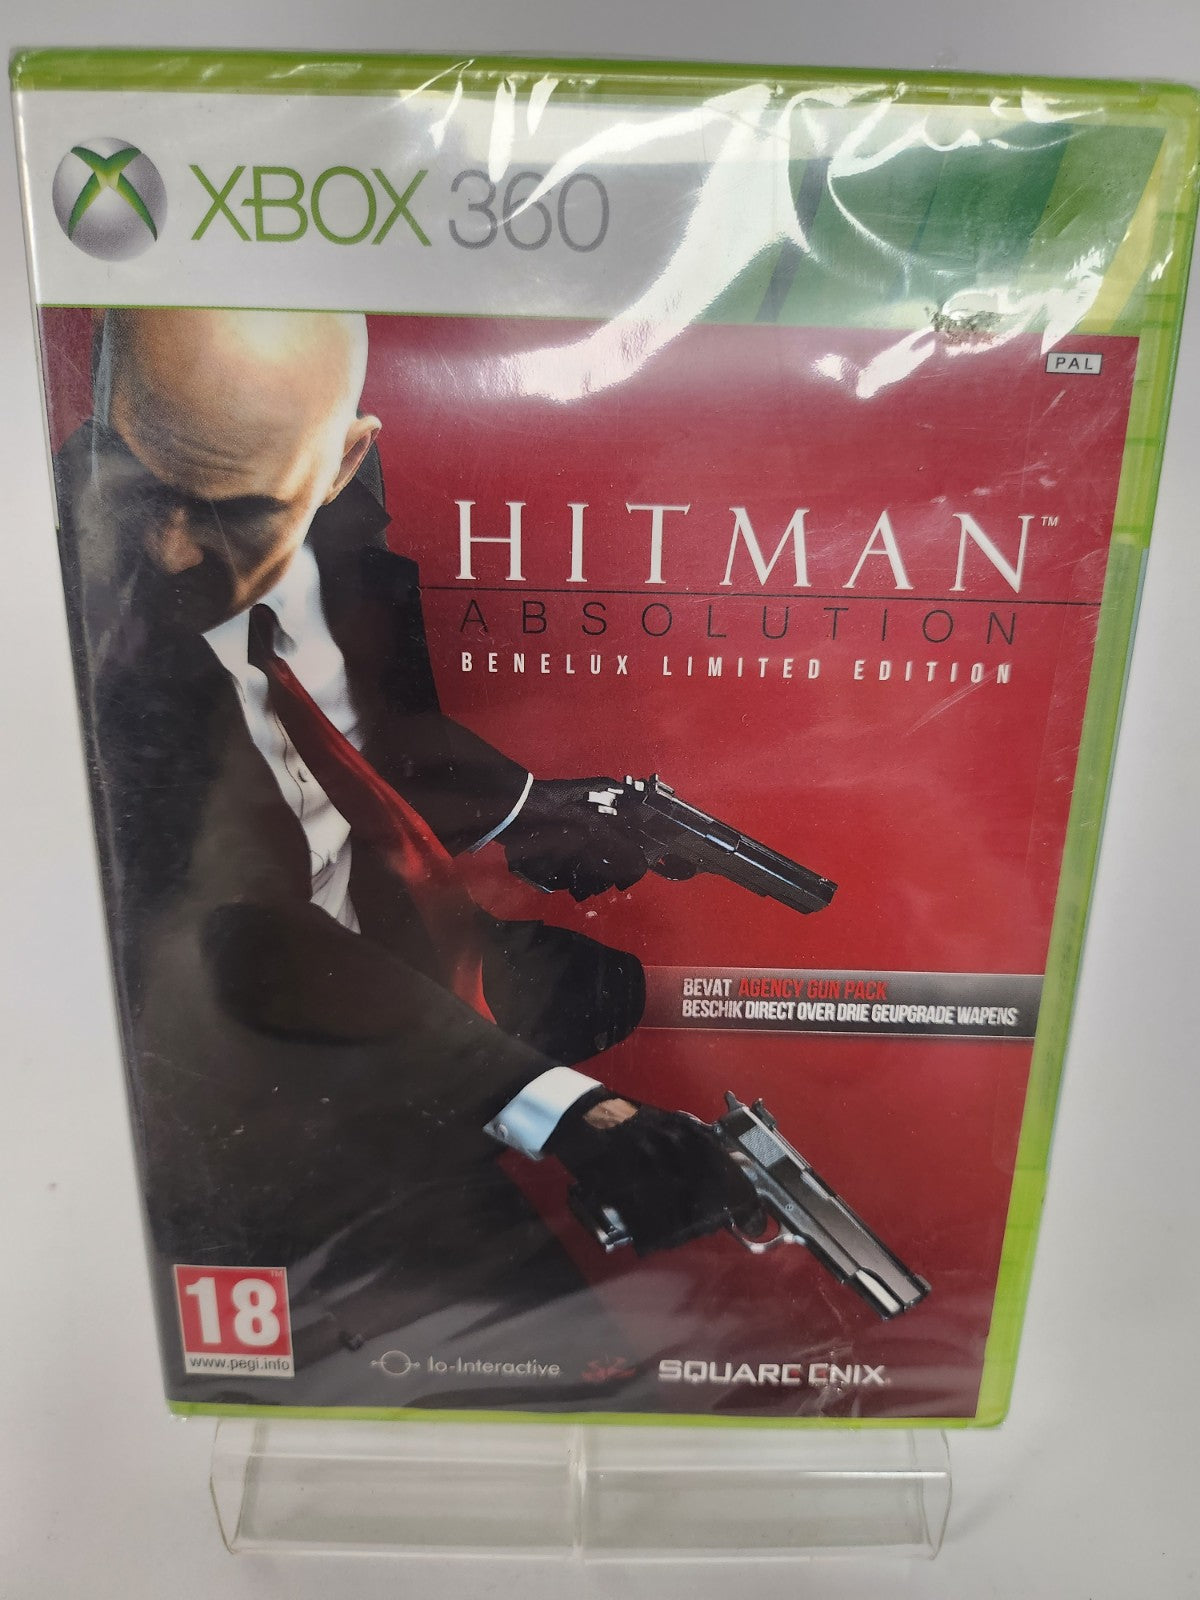 Hitman Absolution Benelux Limited Edition geseald Xbox 360